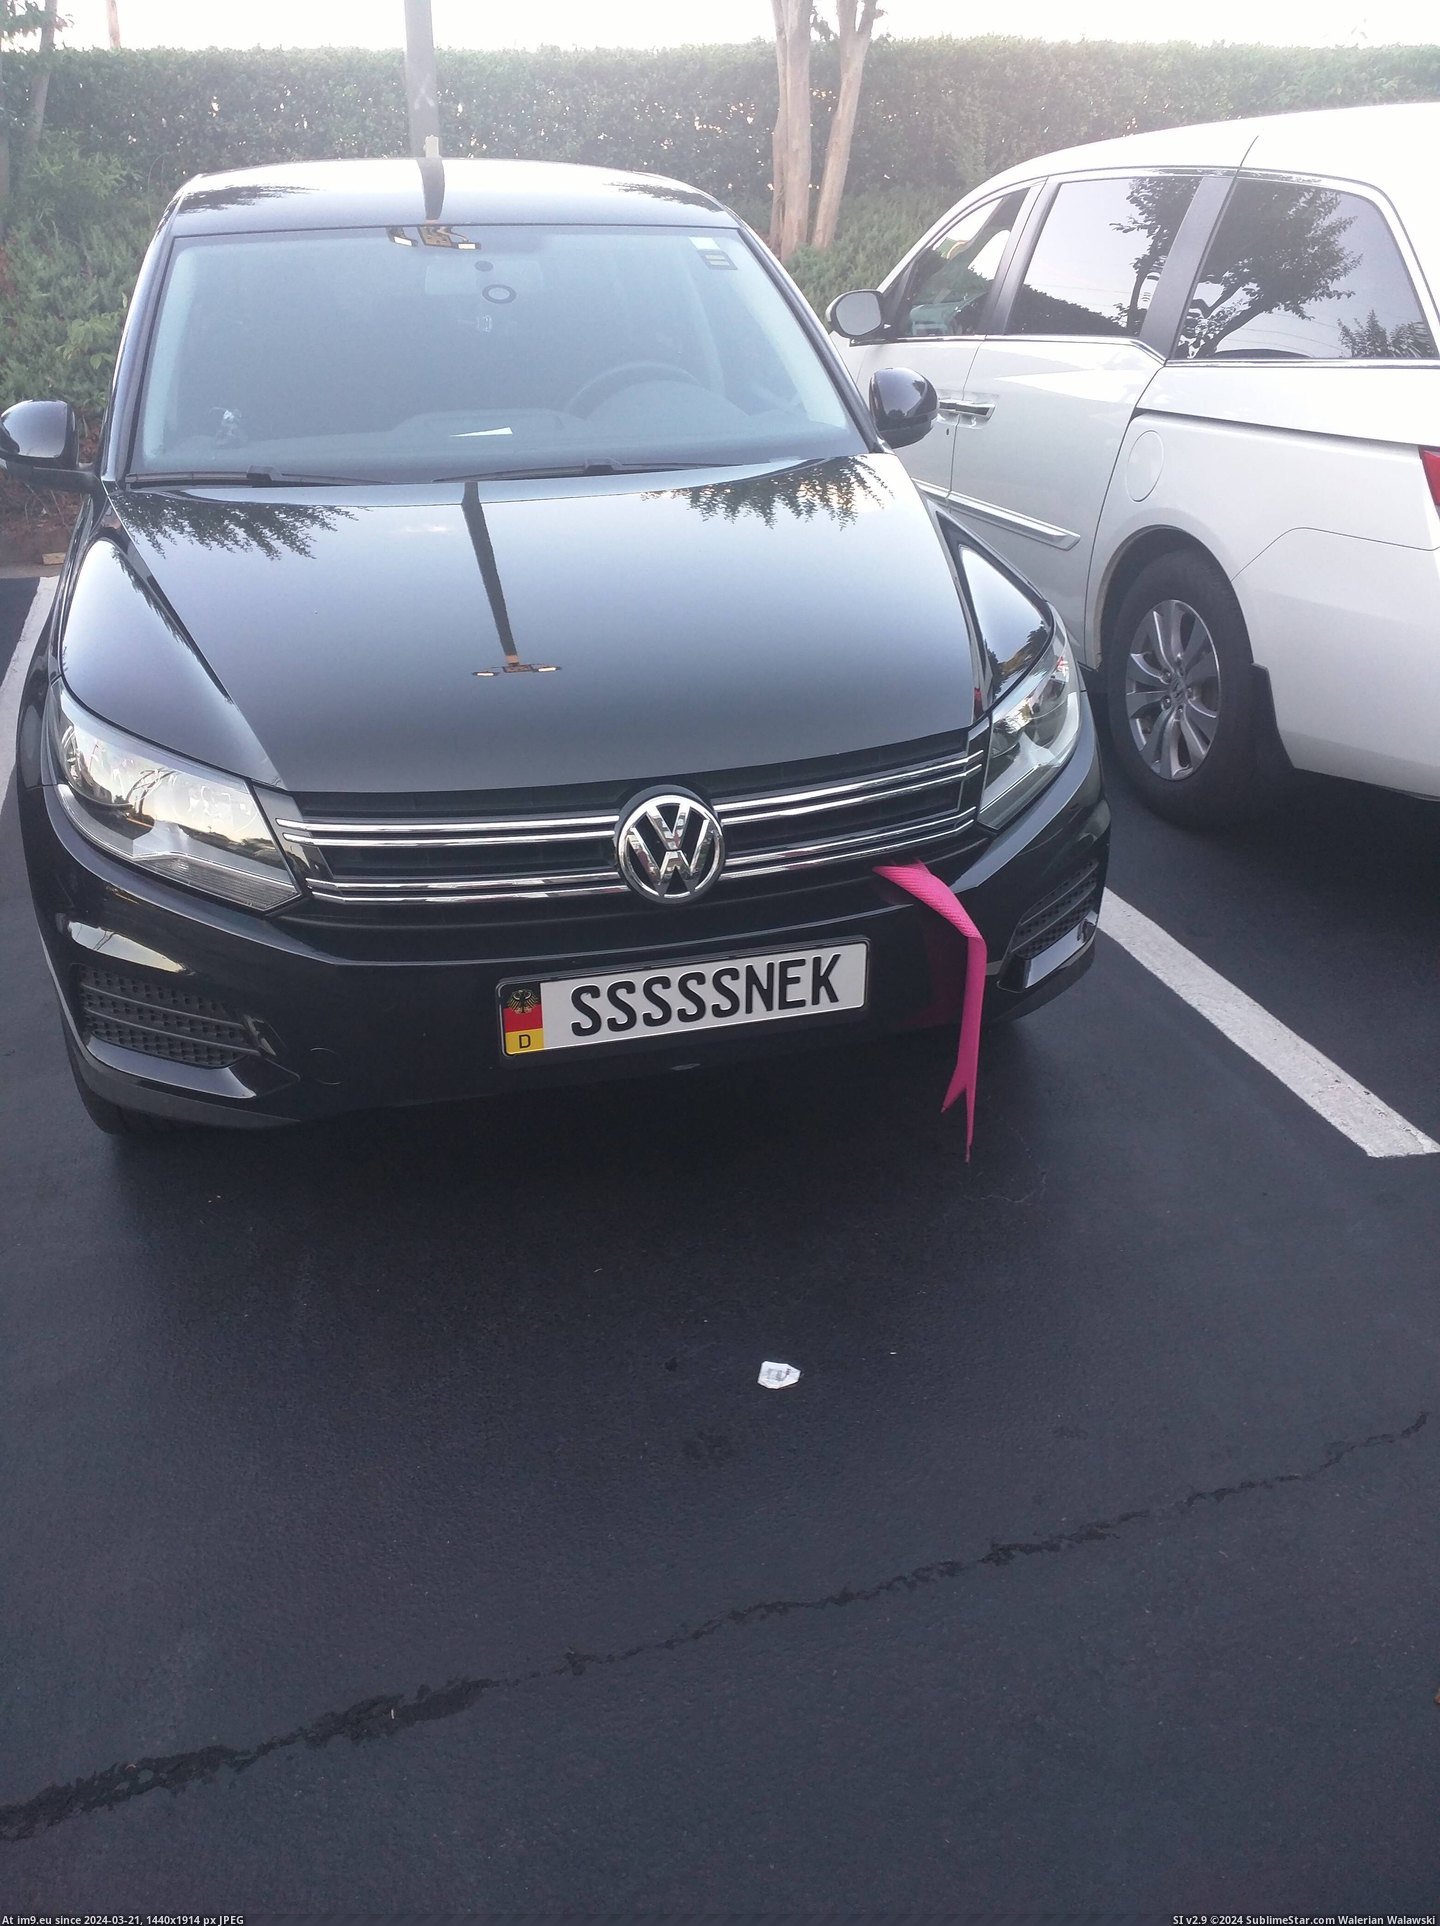 #Funny #Hotel #Car [Funny] This car outside my hotel Pic. (Изображение из альбом My r/FUNNY favs))